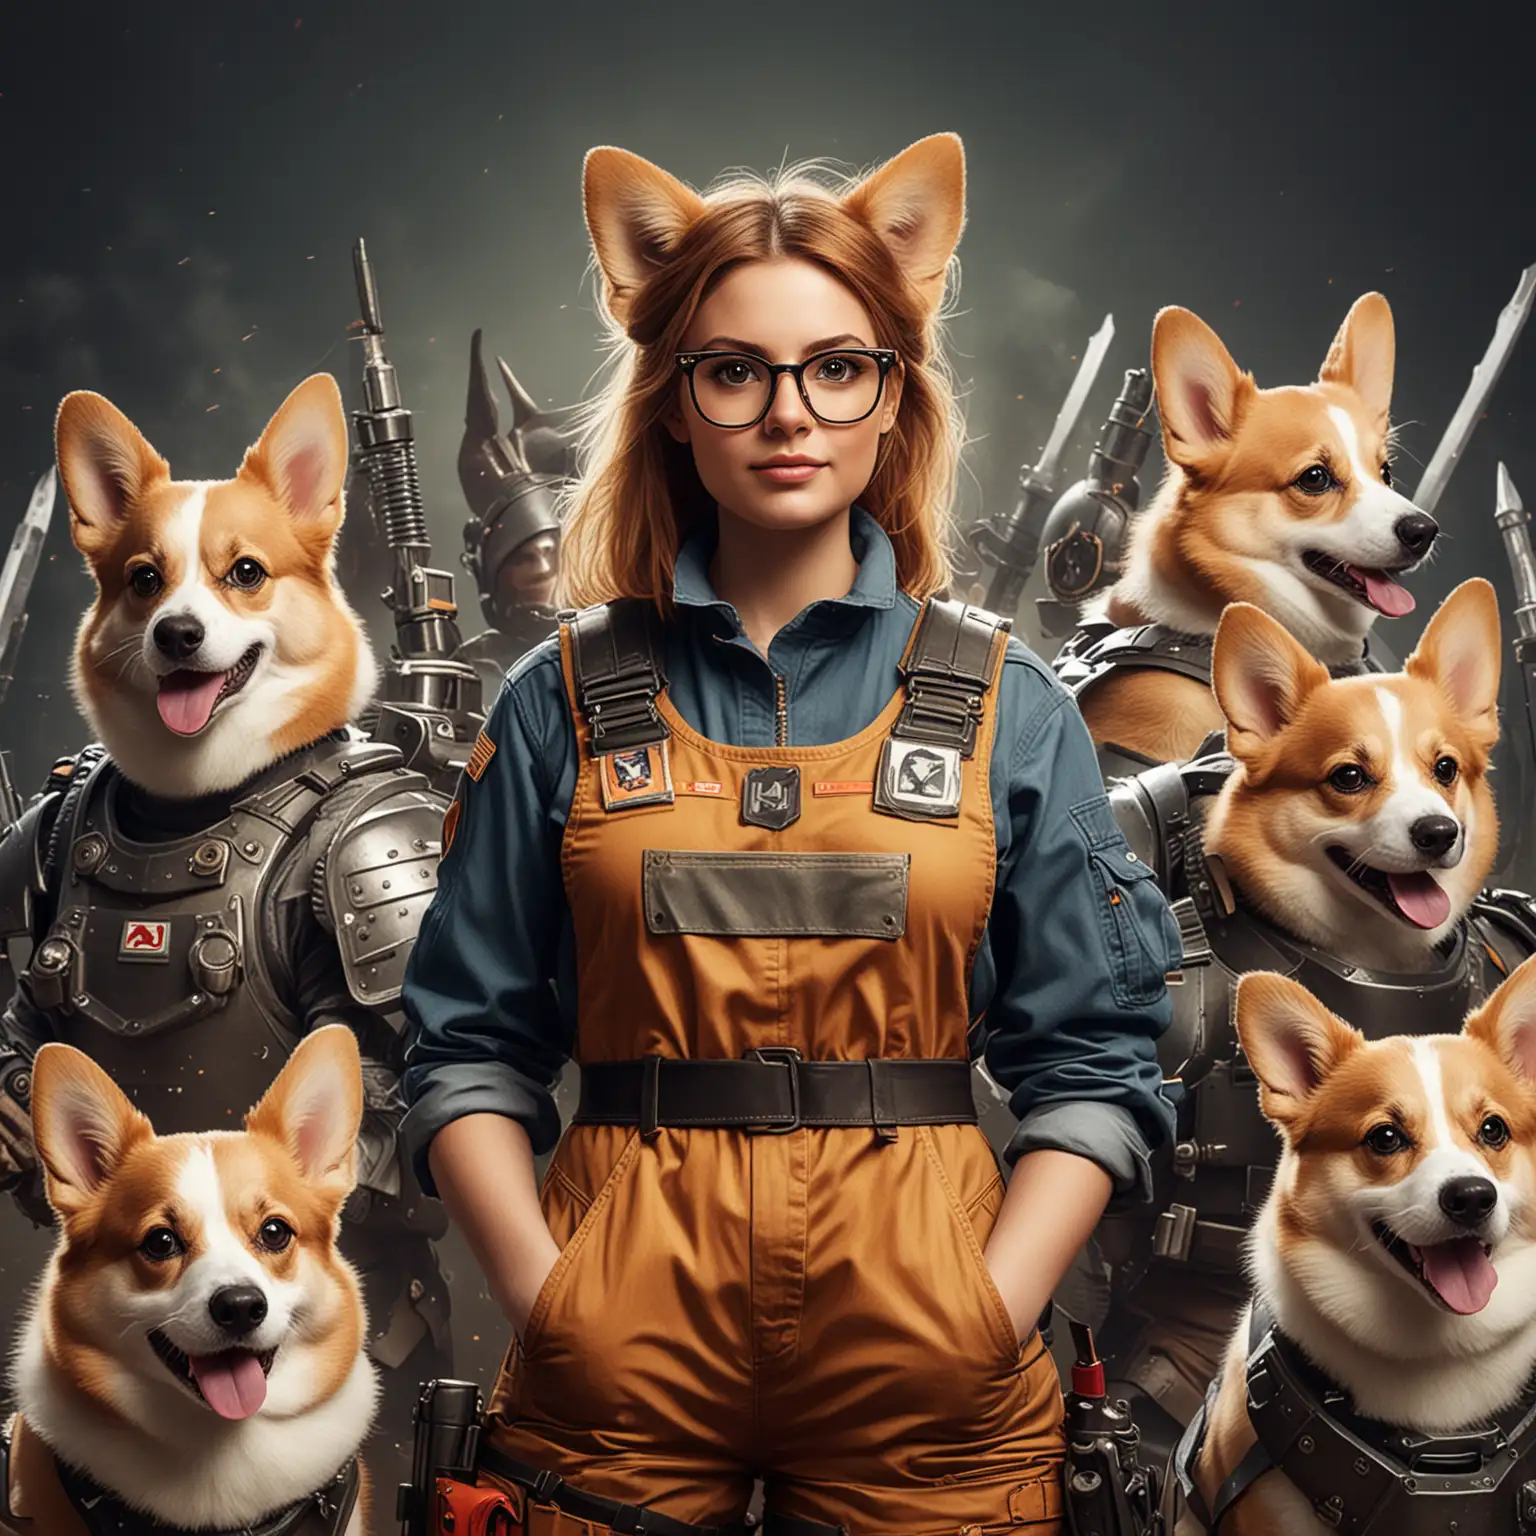 Create a logo of a bespectacled woman in battle overalls surrounded by corgis in battle armor.